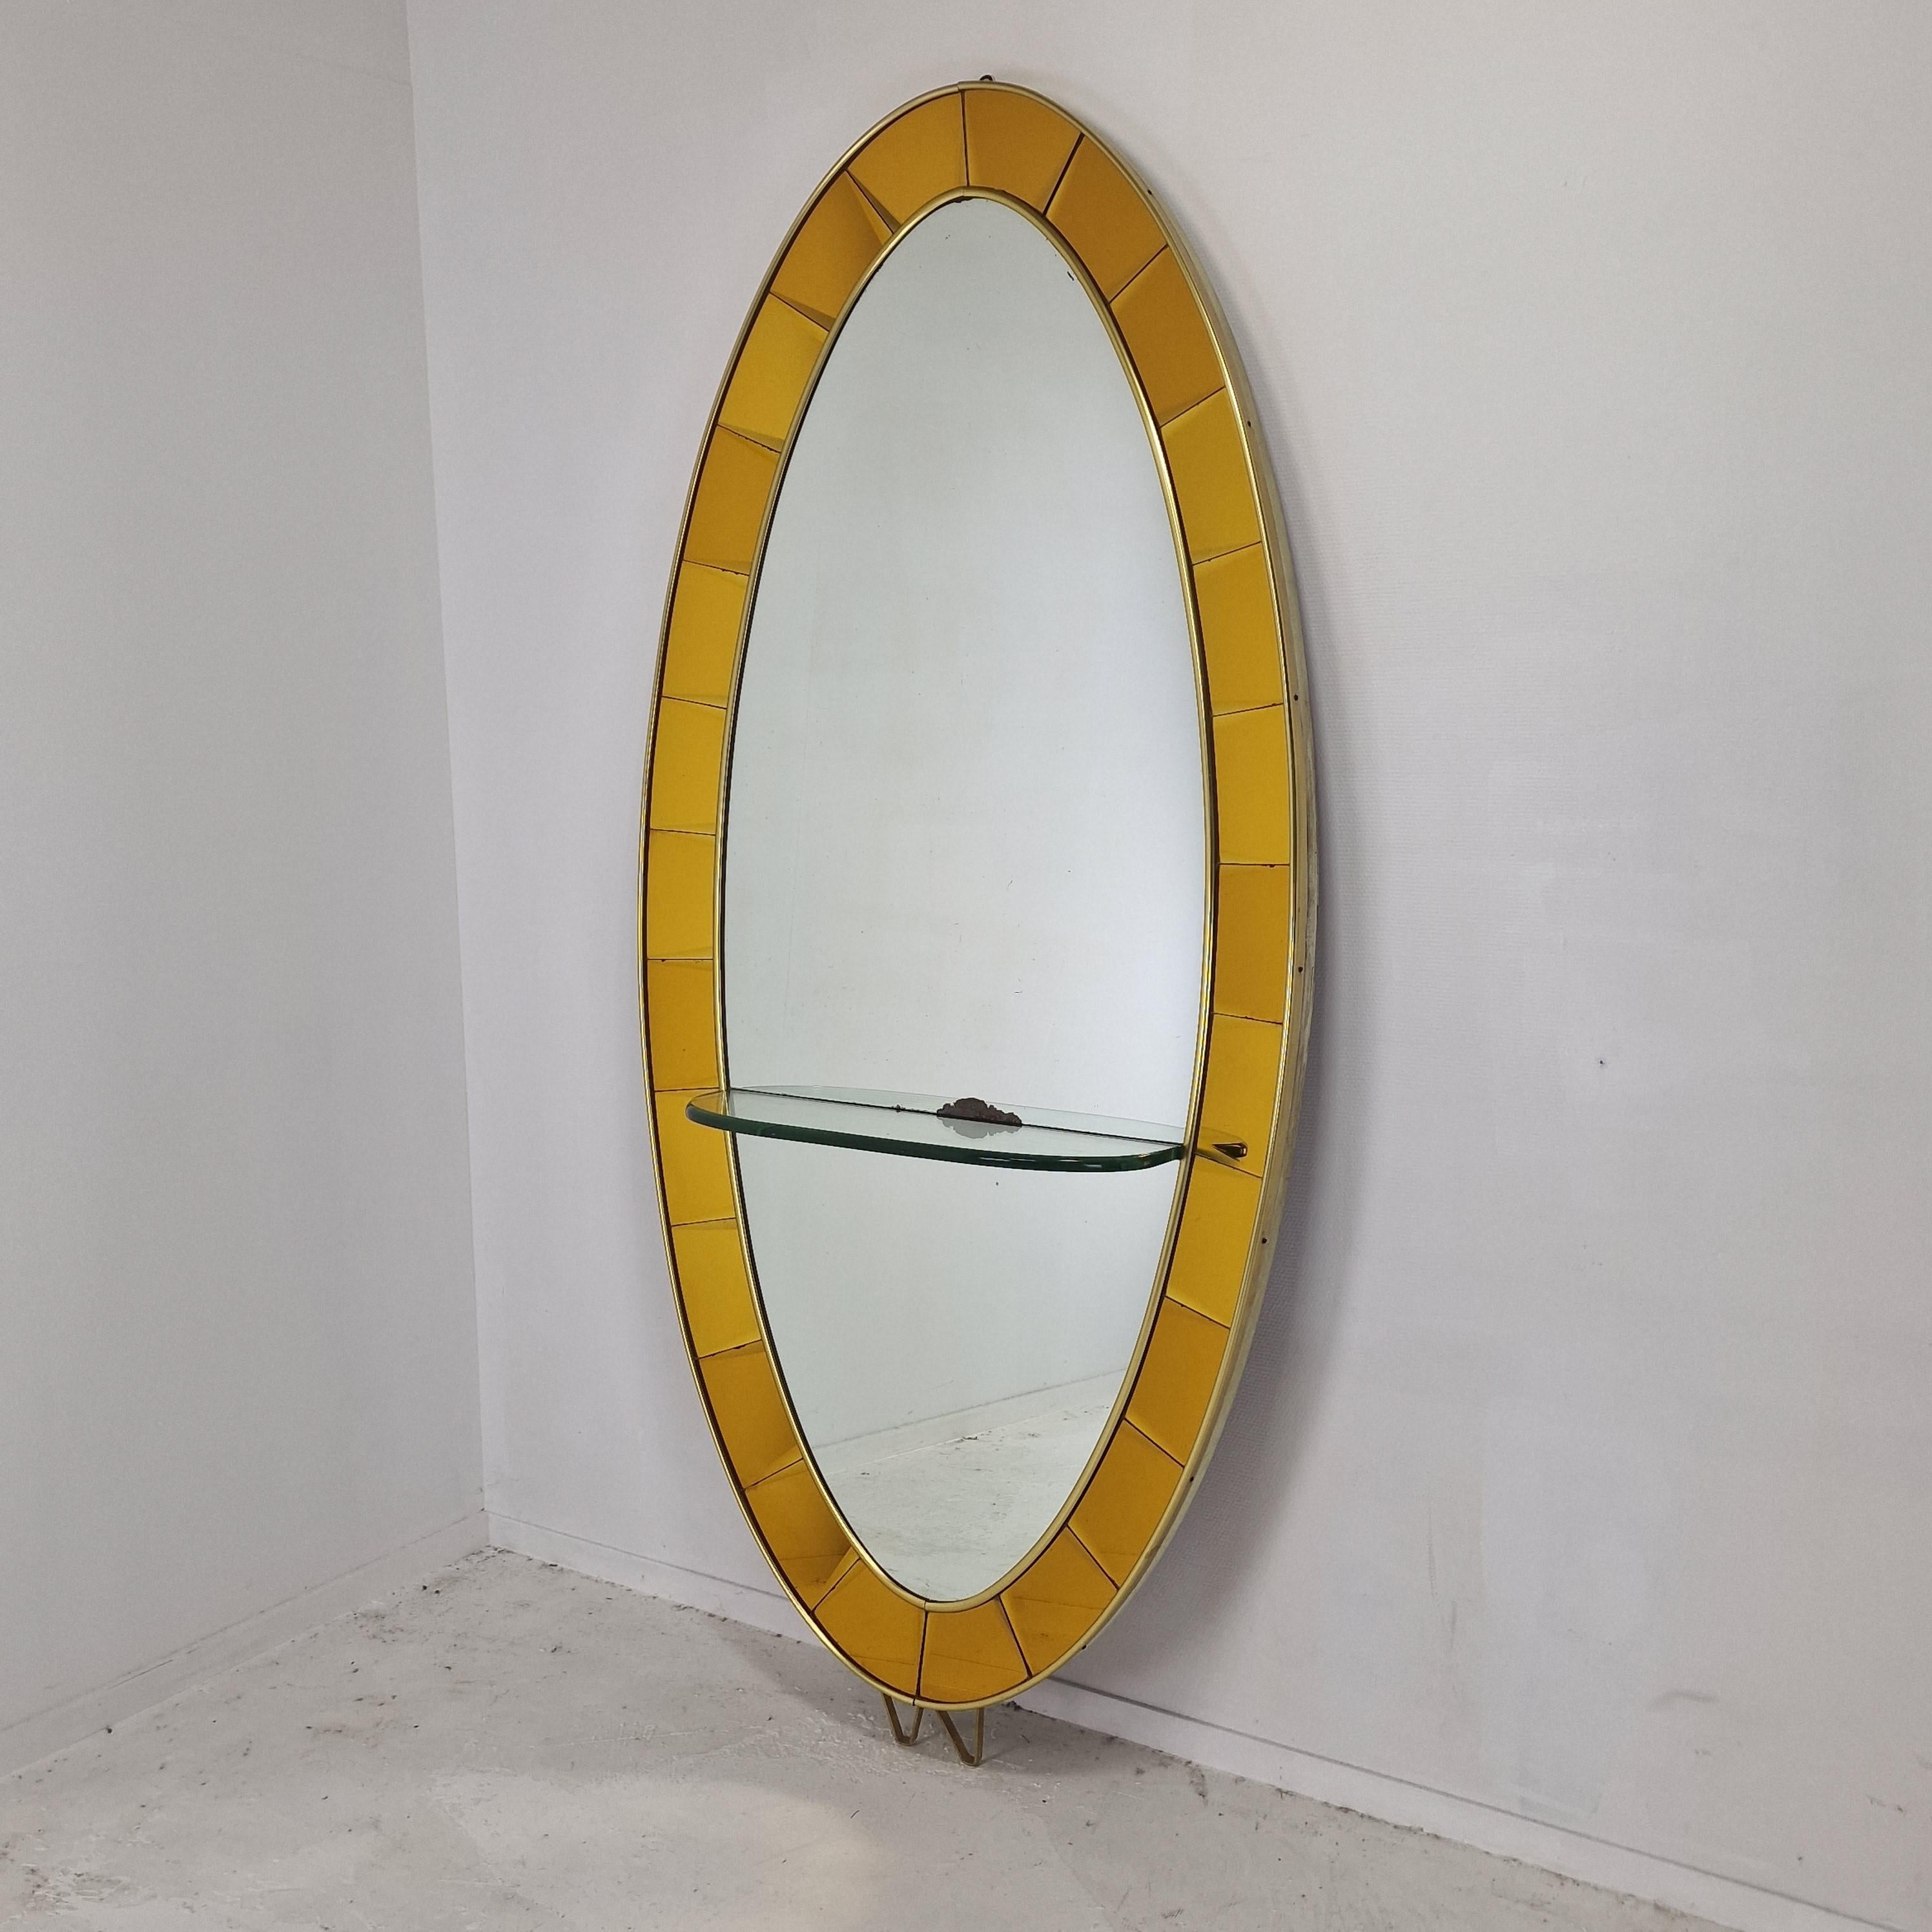 Magnificent and very large floor mirror, original from the 50's.
Fabricated by the Italian company Cristal Art.

Elegant oval shaped with a thick bevelled crystal console table.
Beautiful gold yellow crystal glass and a brass frame. 
The mirror